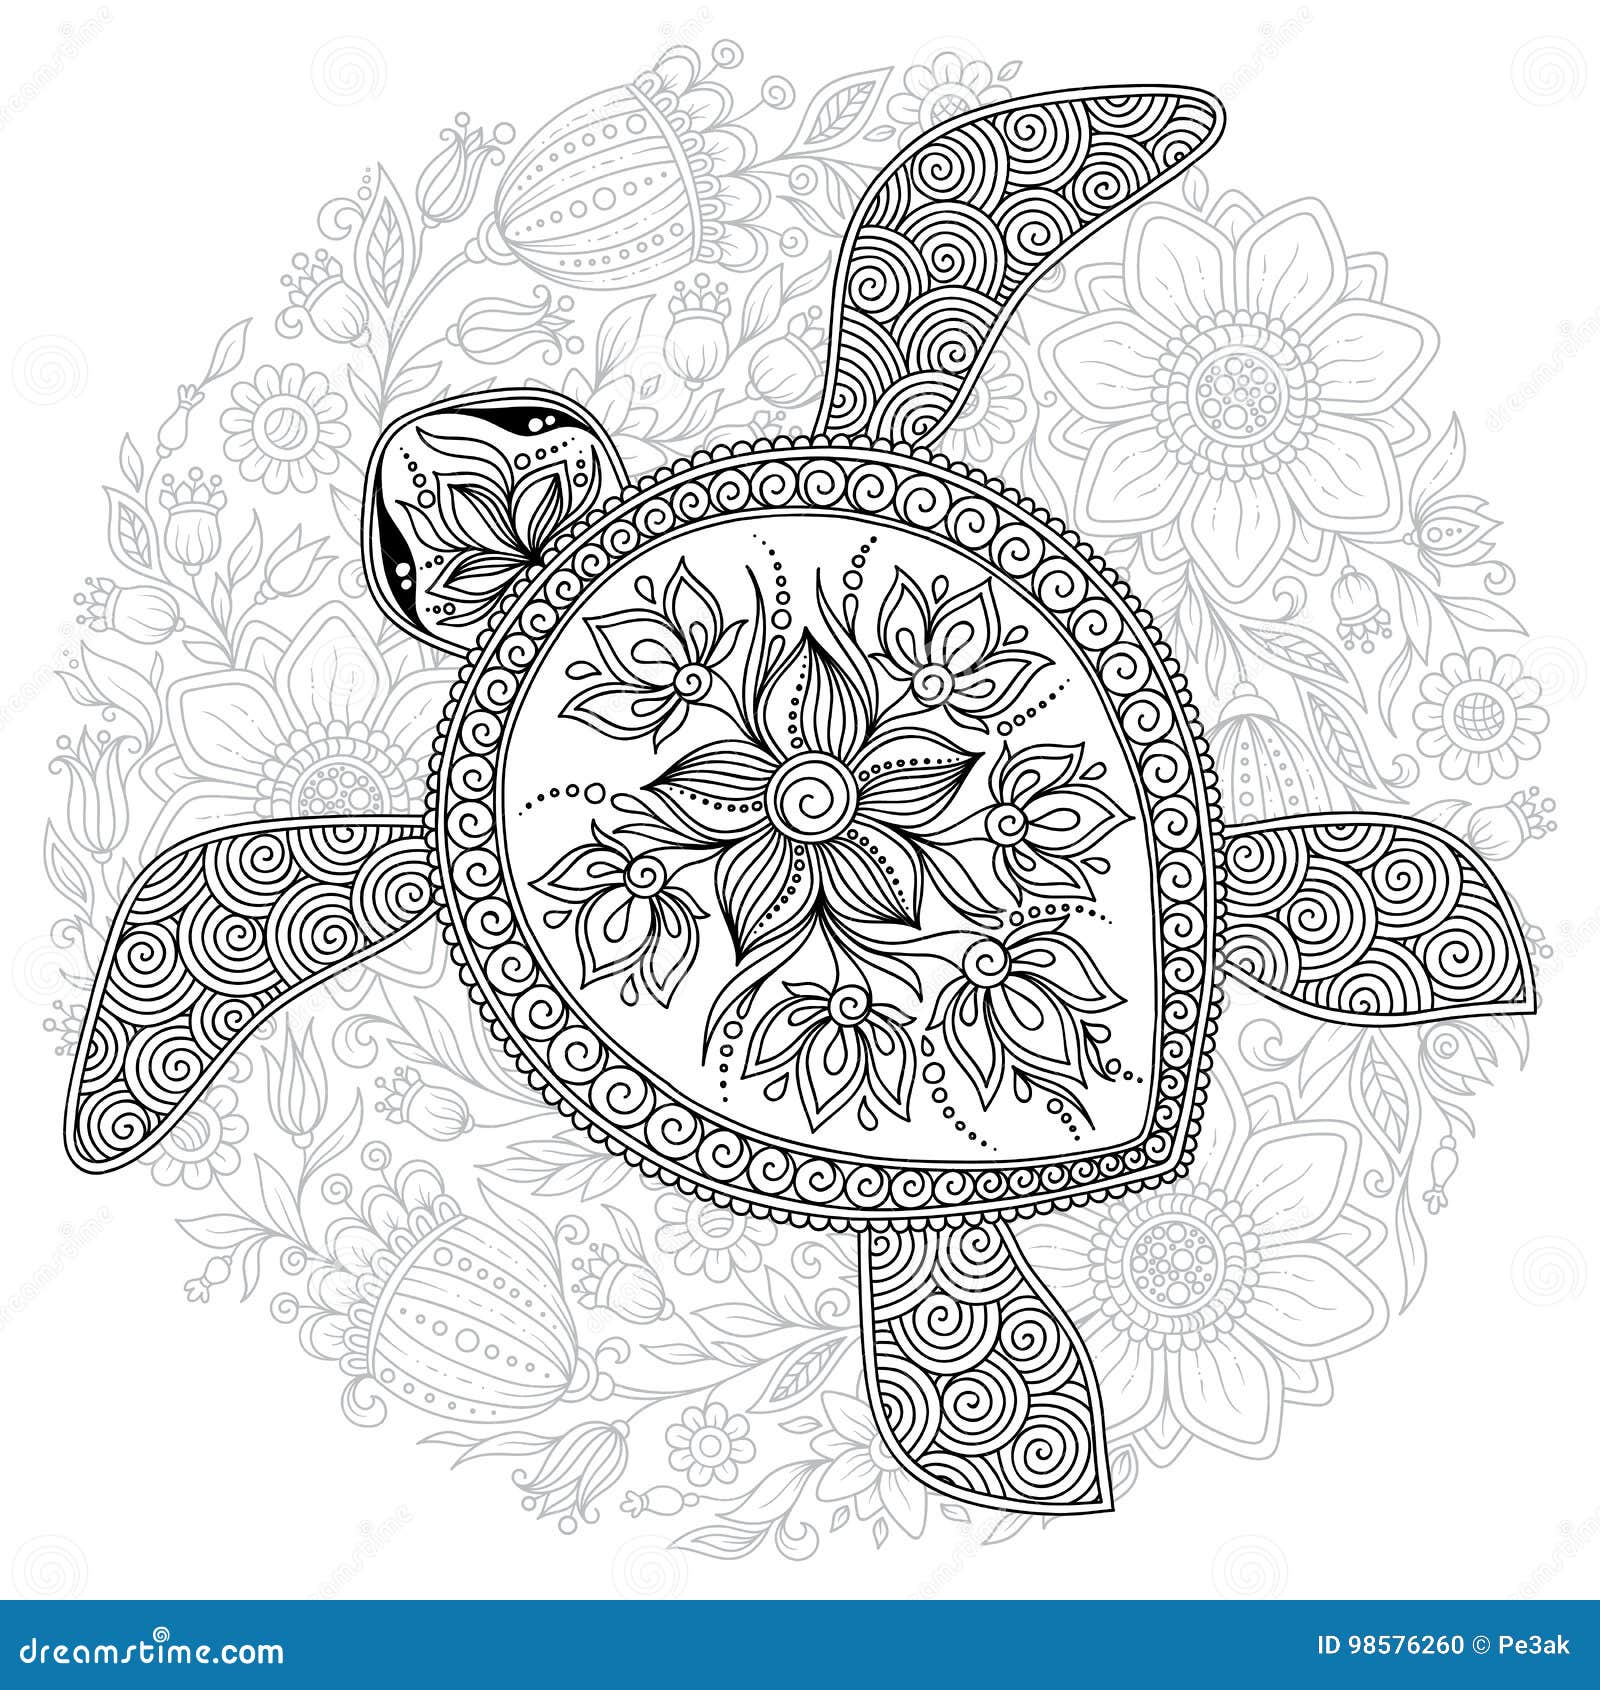 Vector illustration of sea turtle for coloring book pages stock vector